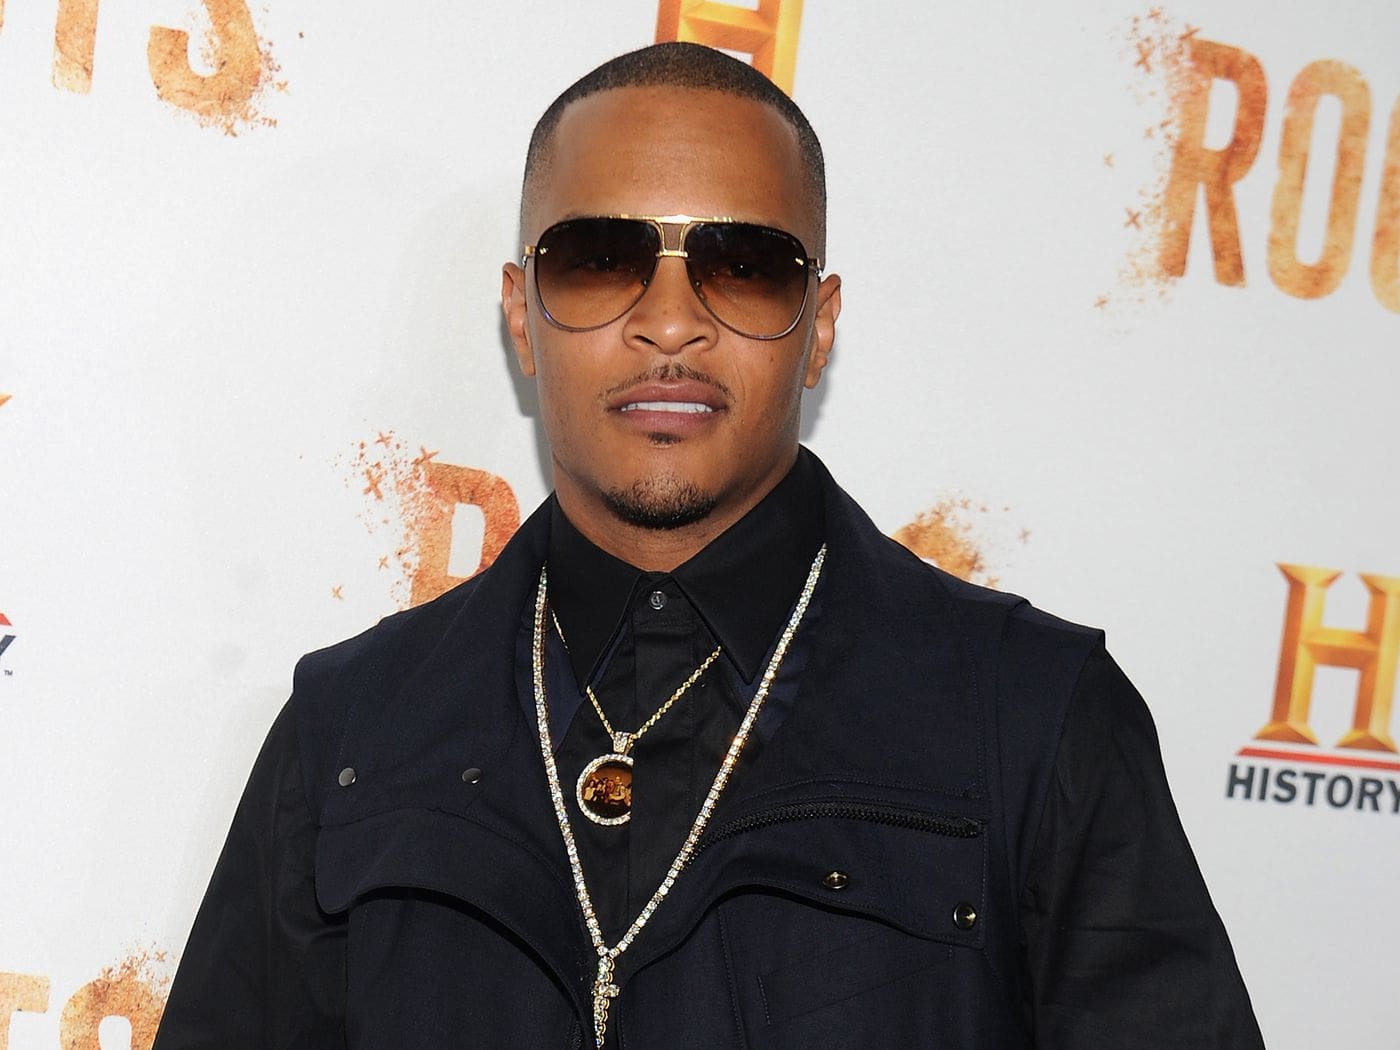 T.I. Advises Fans Not To Panic, But Remain Informed